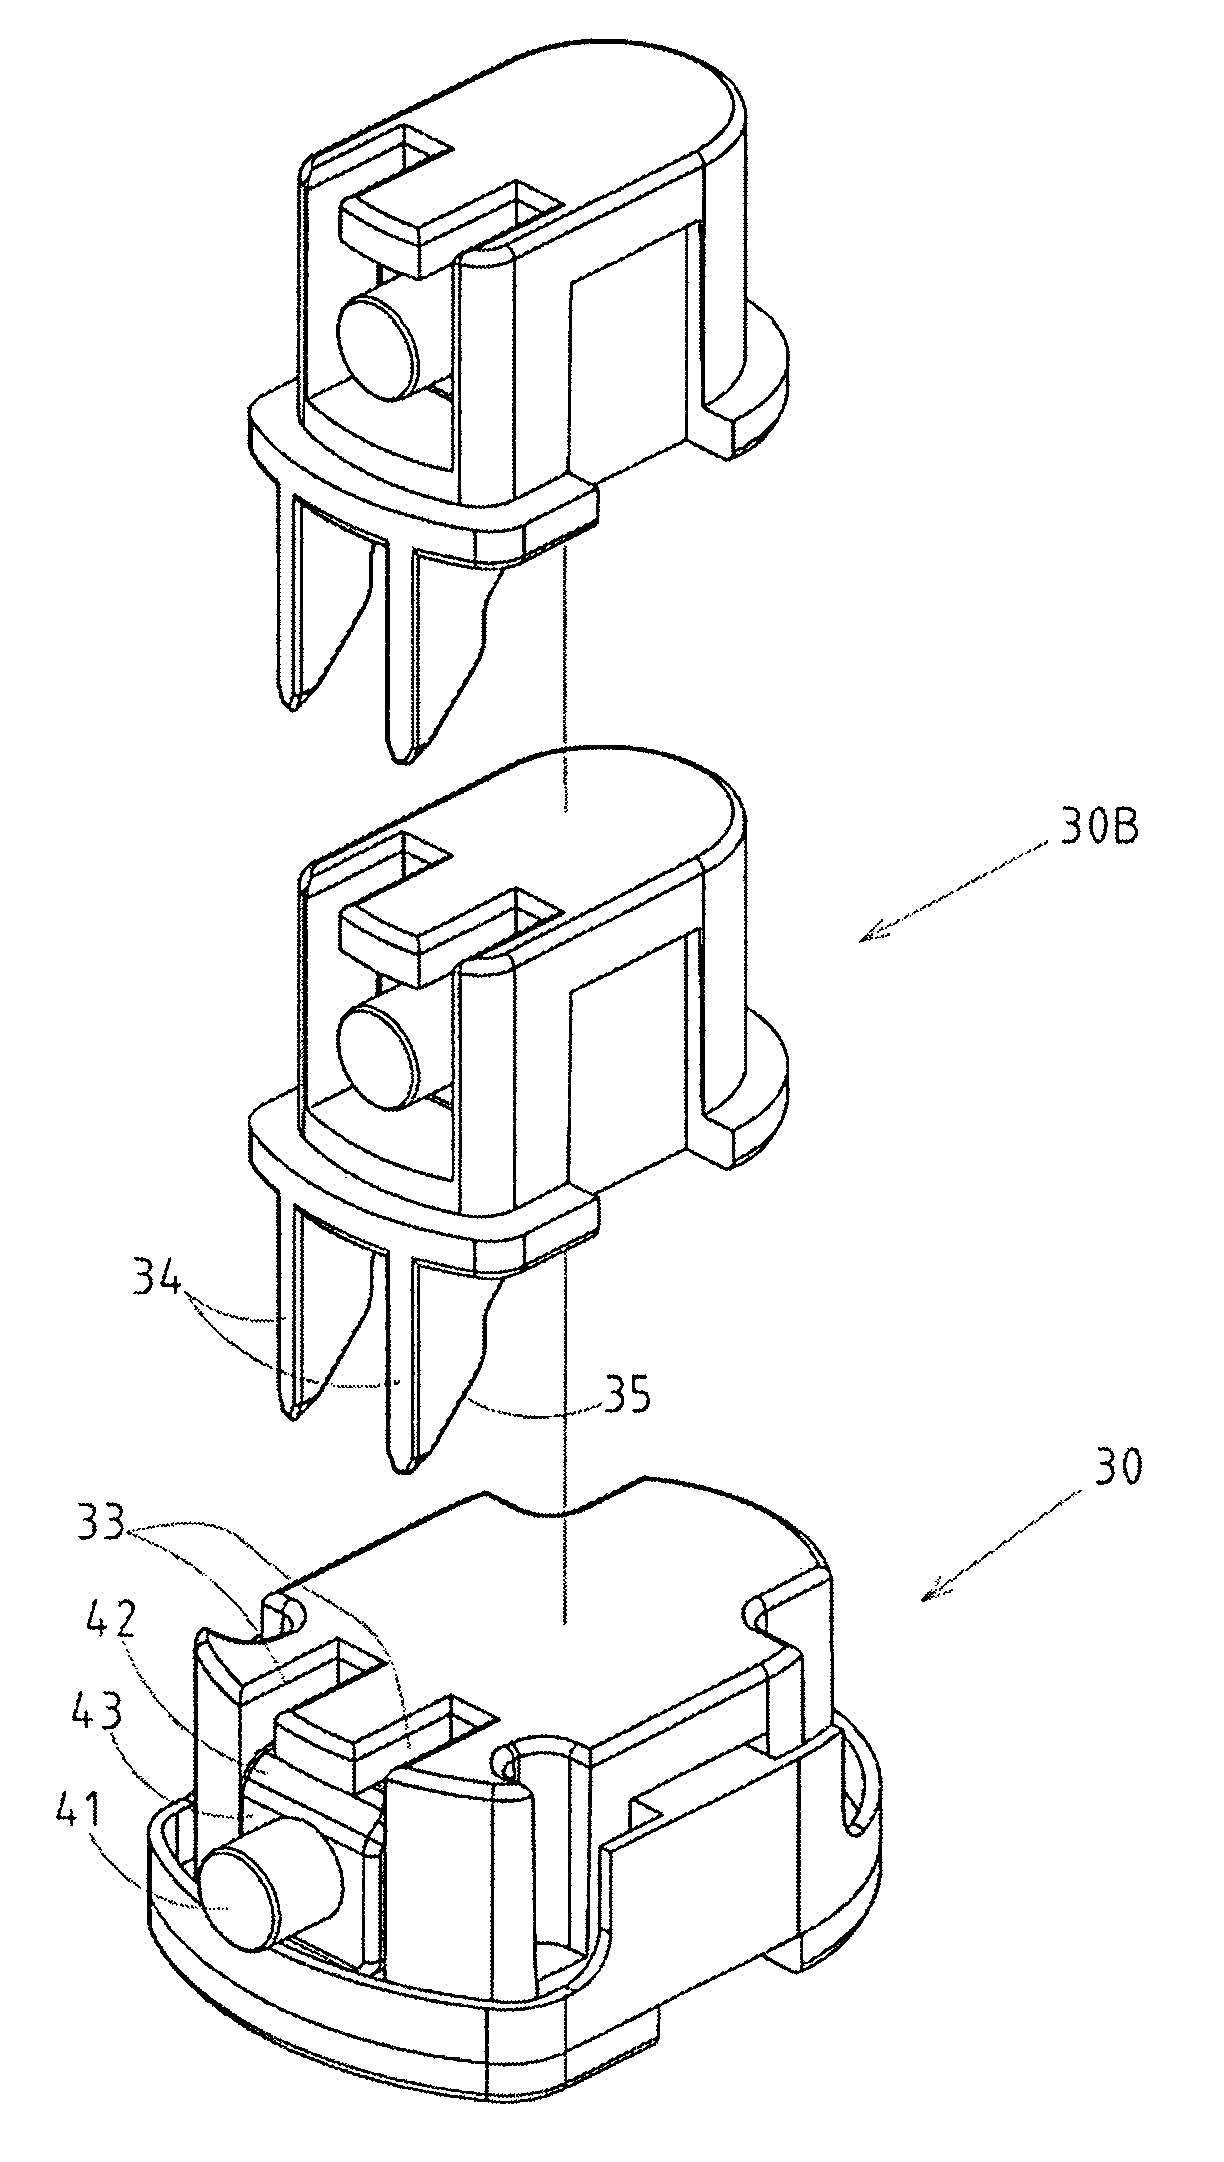 Structure of an extendable pull handle for luggage